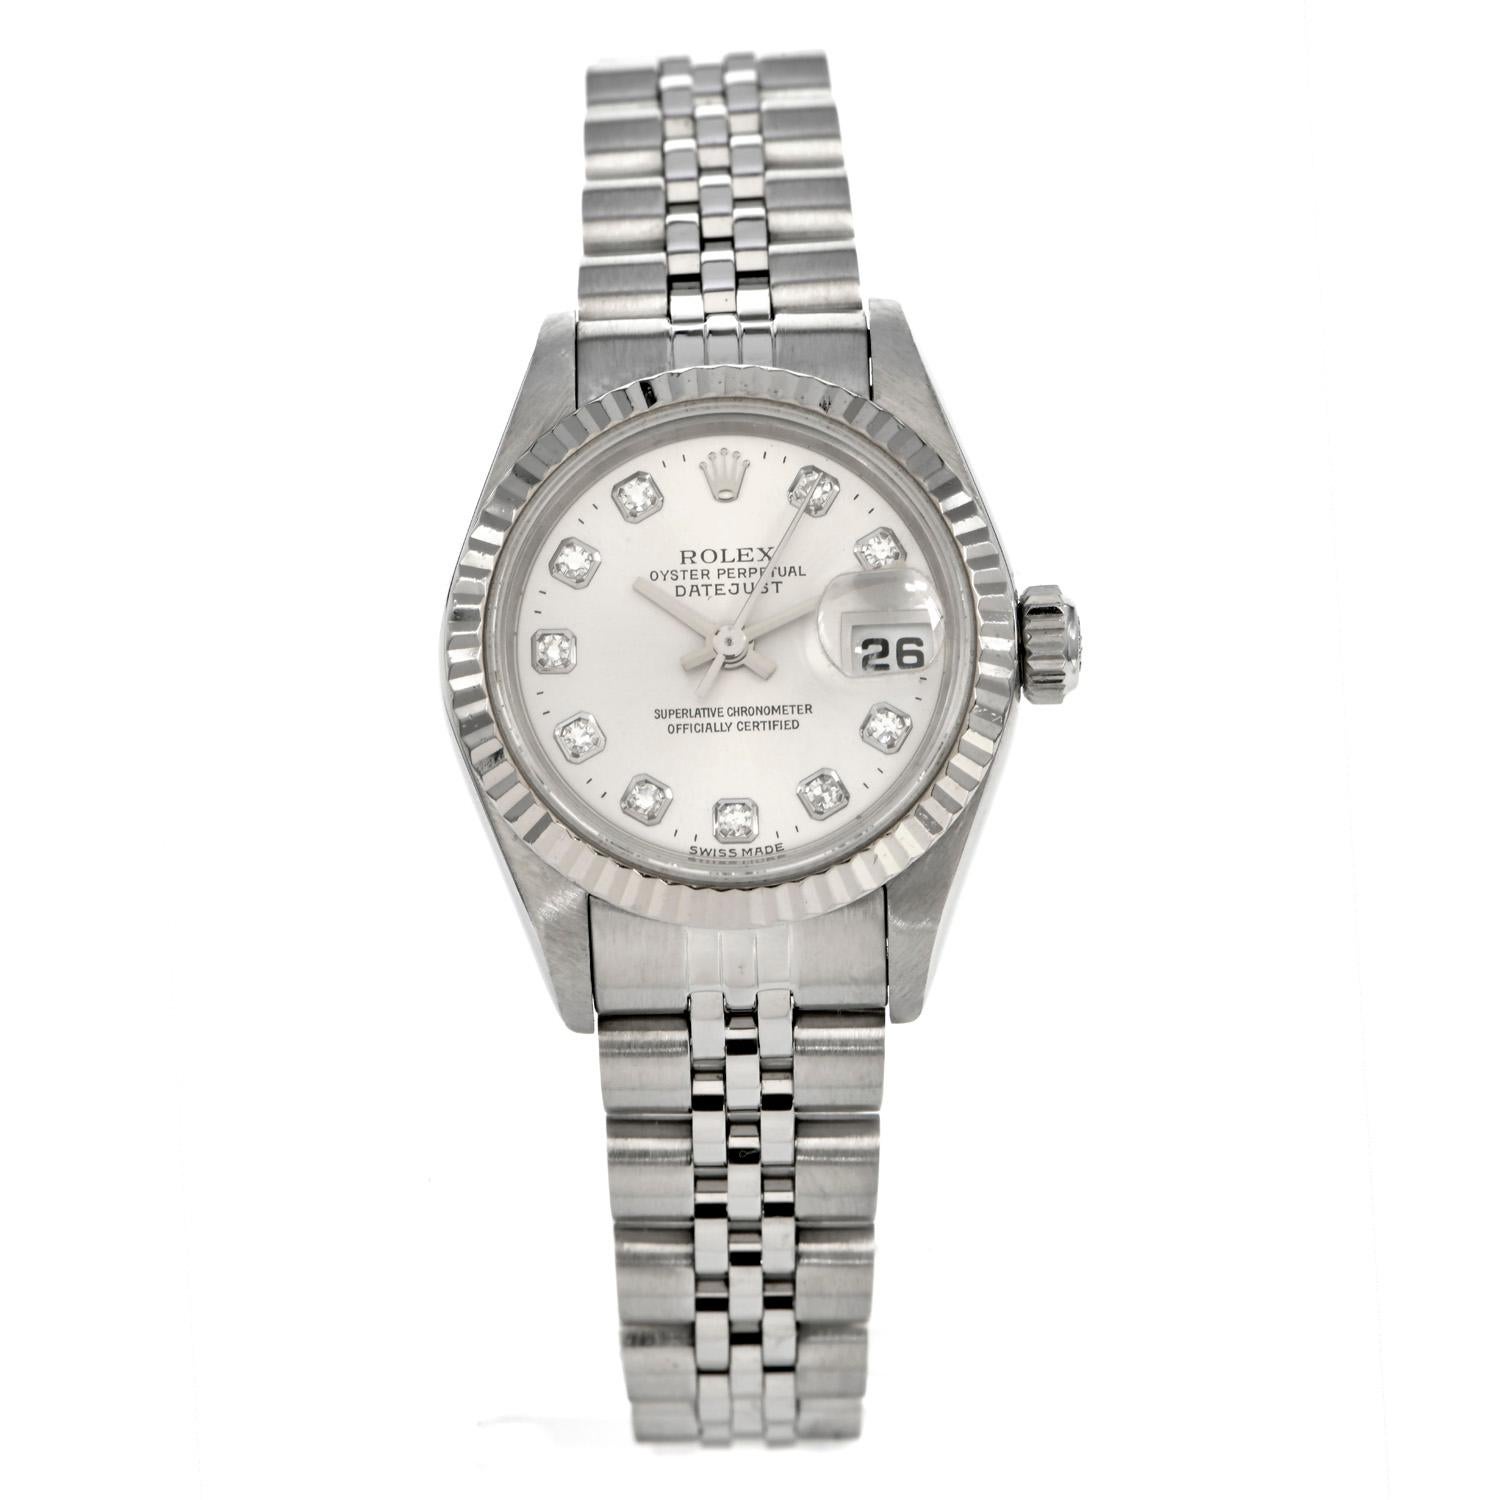 This Rolex Oyster Perpetual Datejust watch is in very good condition, making it the perfect luxury present,

With all original factory set diamond dial. It is crafted in Stainless Steel with an 18K White Gold bezel. With factory-set round diamond